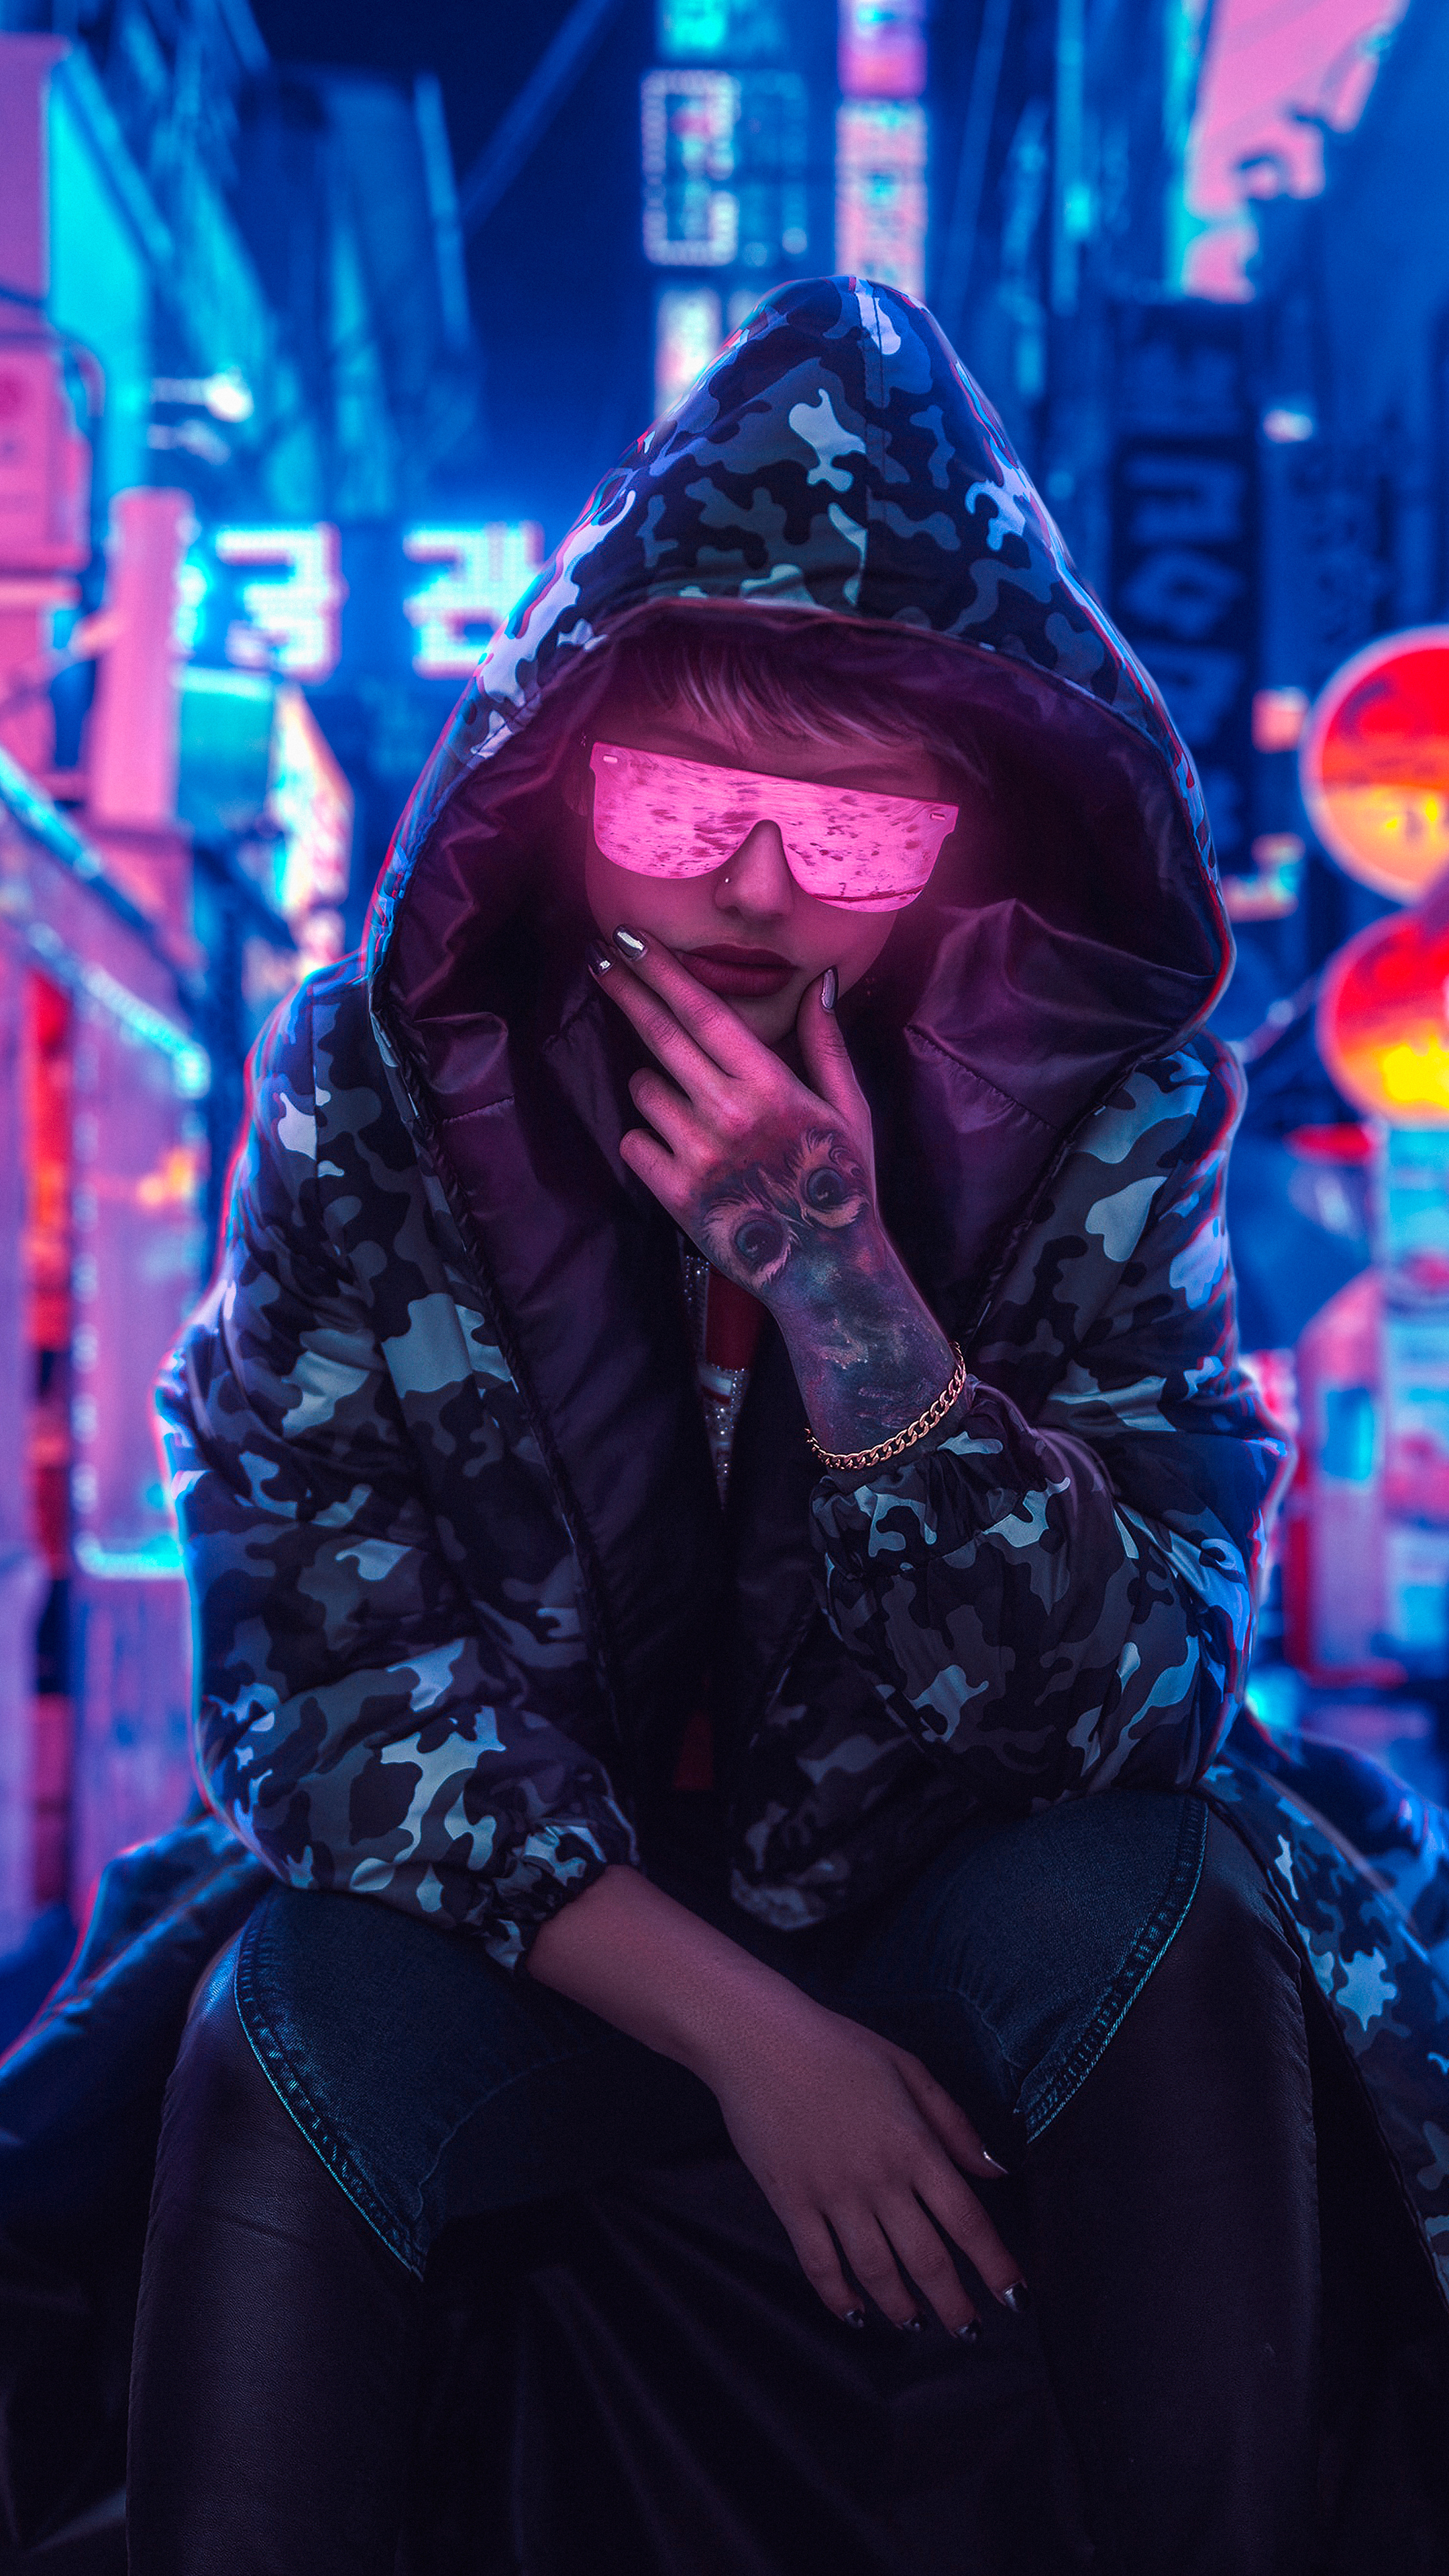 2160x3840 Neon Glasses Girl Wearing Hoodie Sony Xperia X,XZ,Z5 Premium HD 4k Wallpapers, Images ...